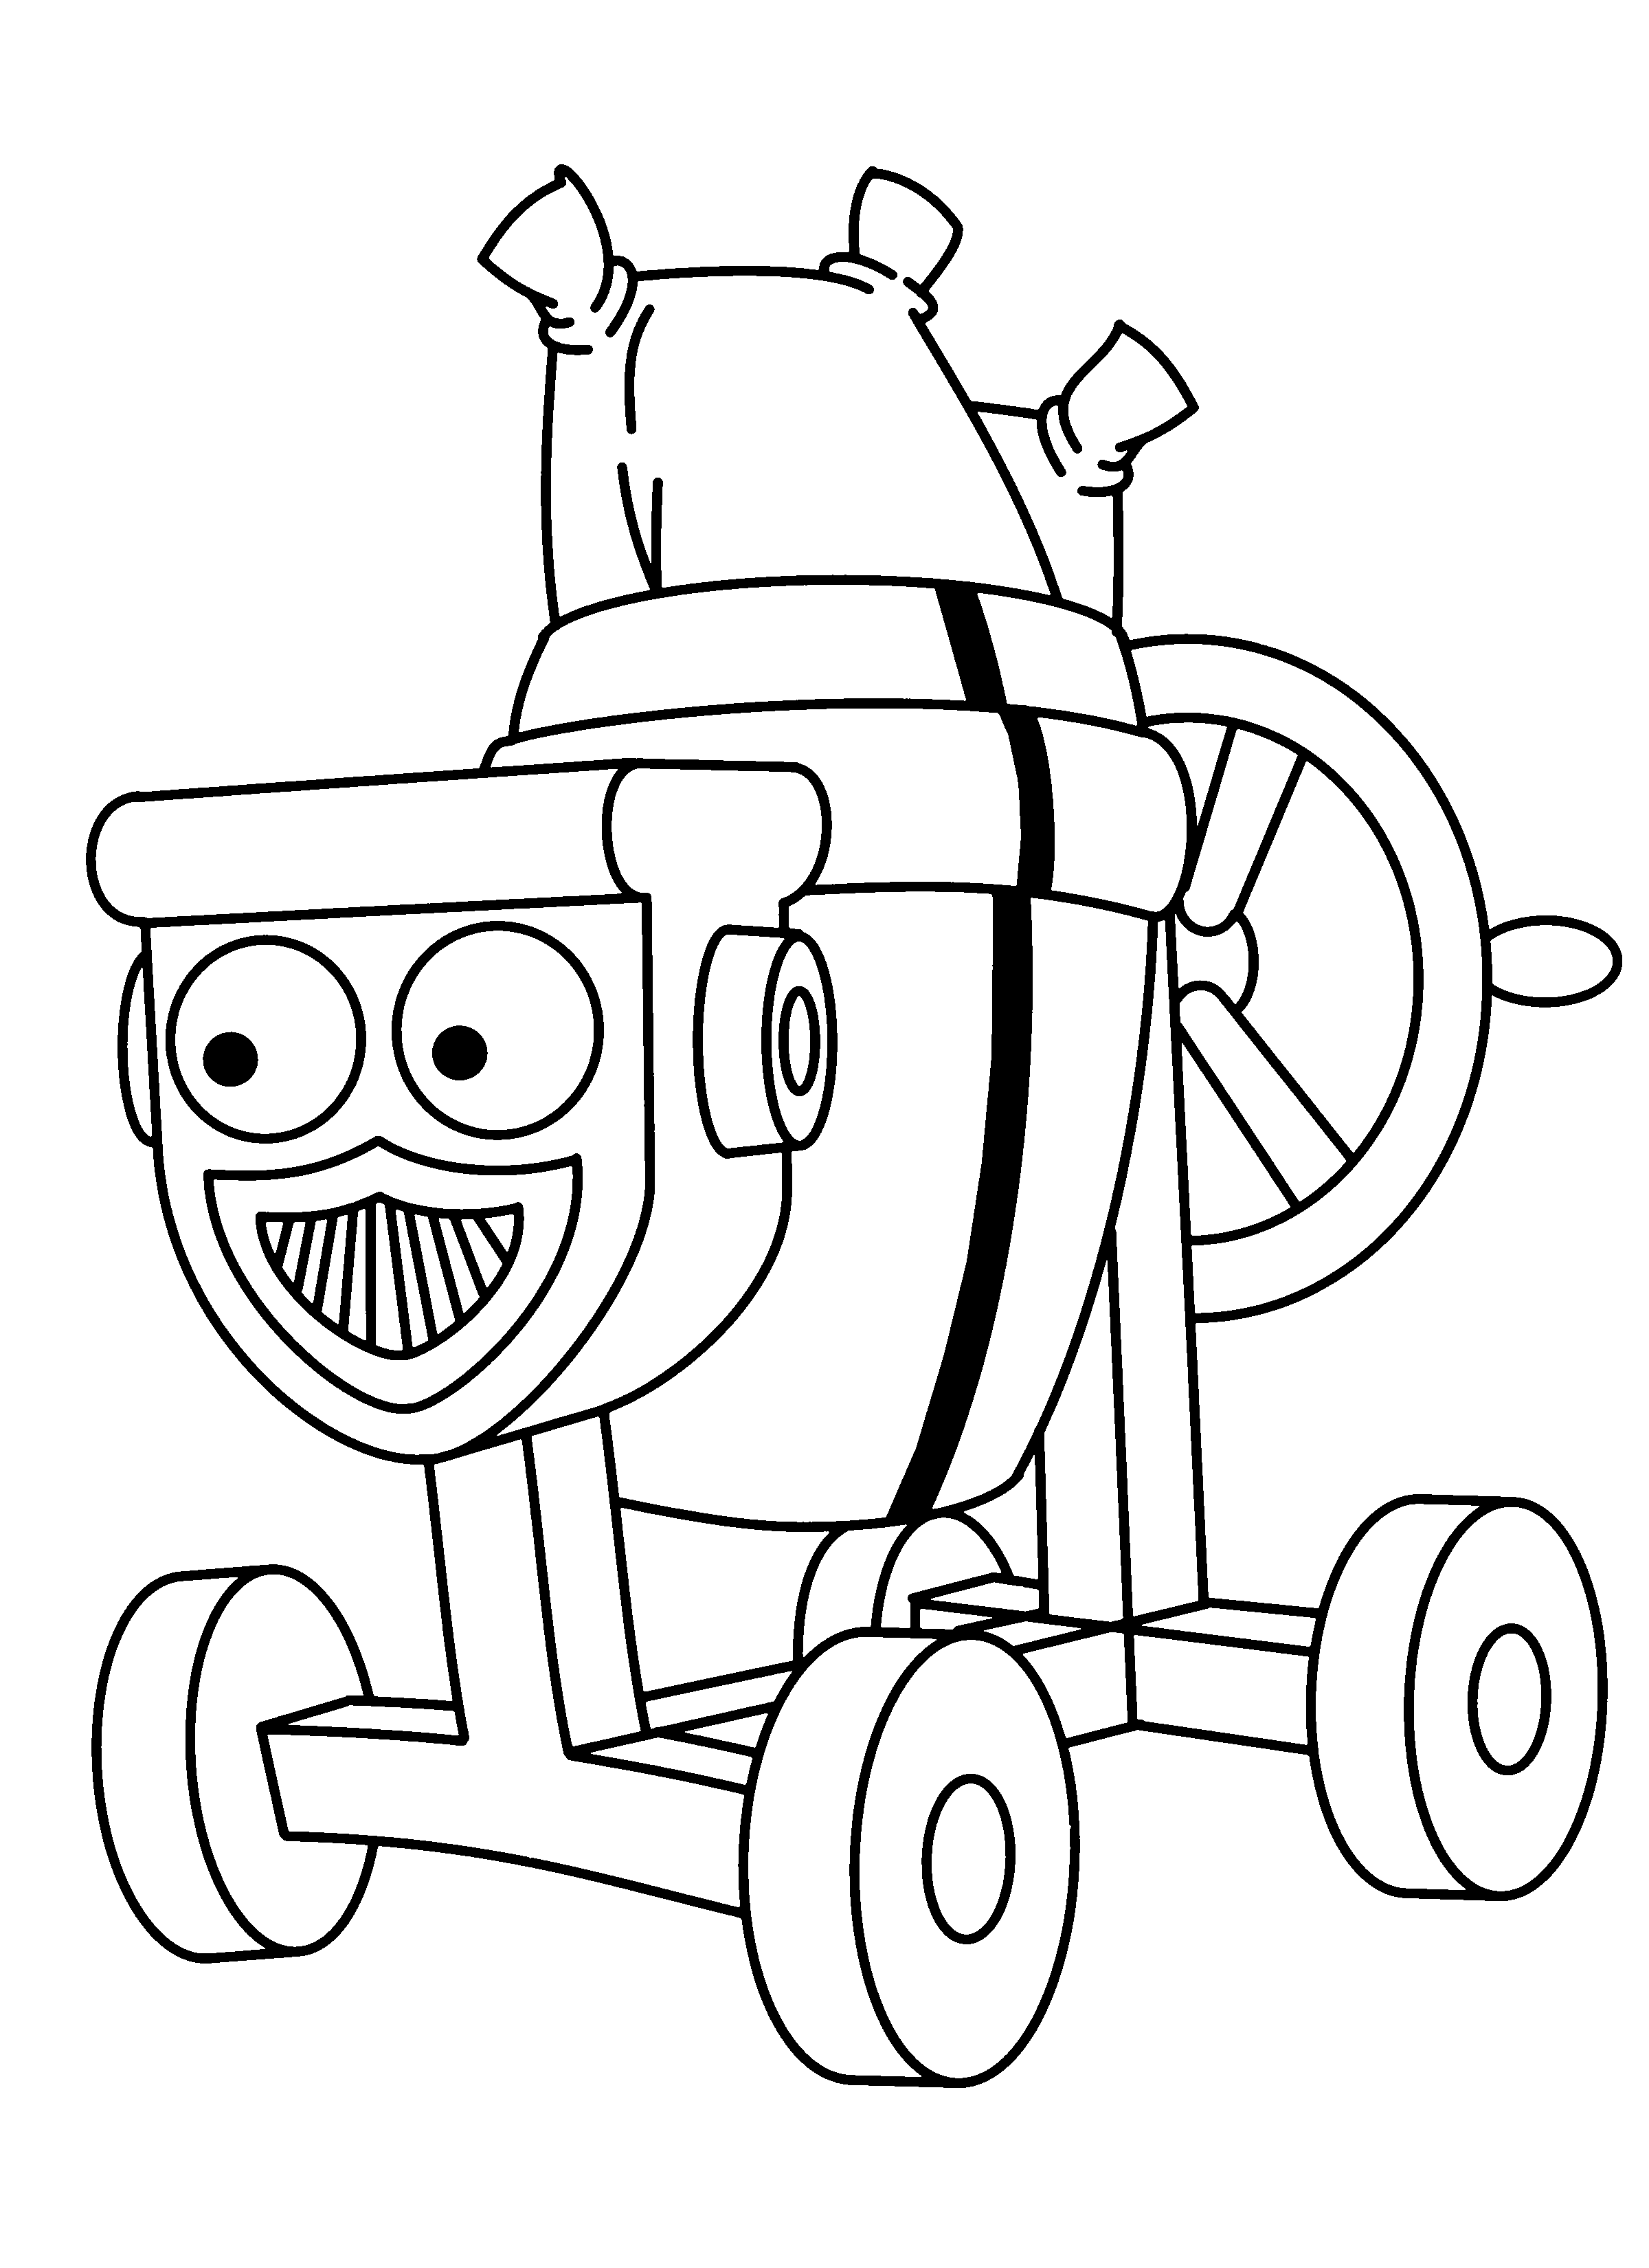 Coloring Page - Bob the builder coloring pages 58